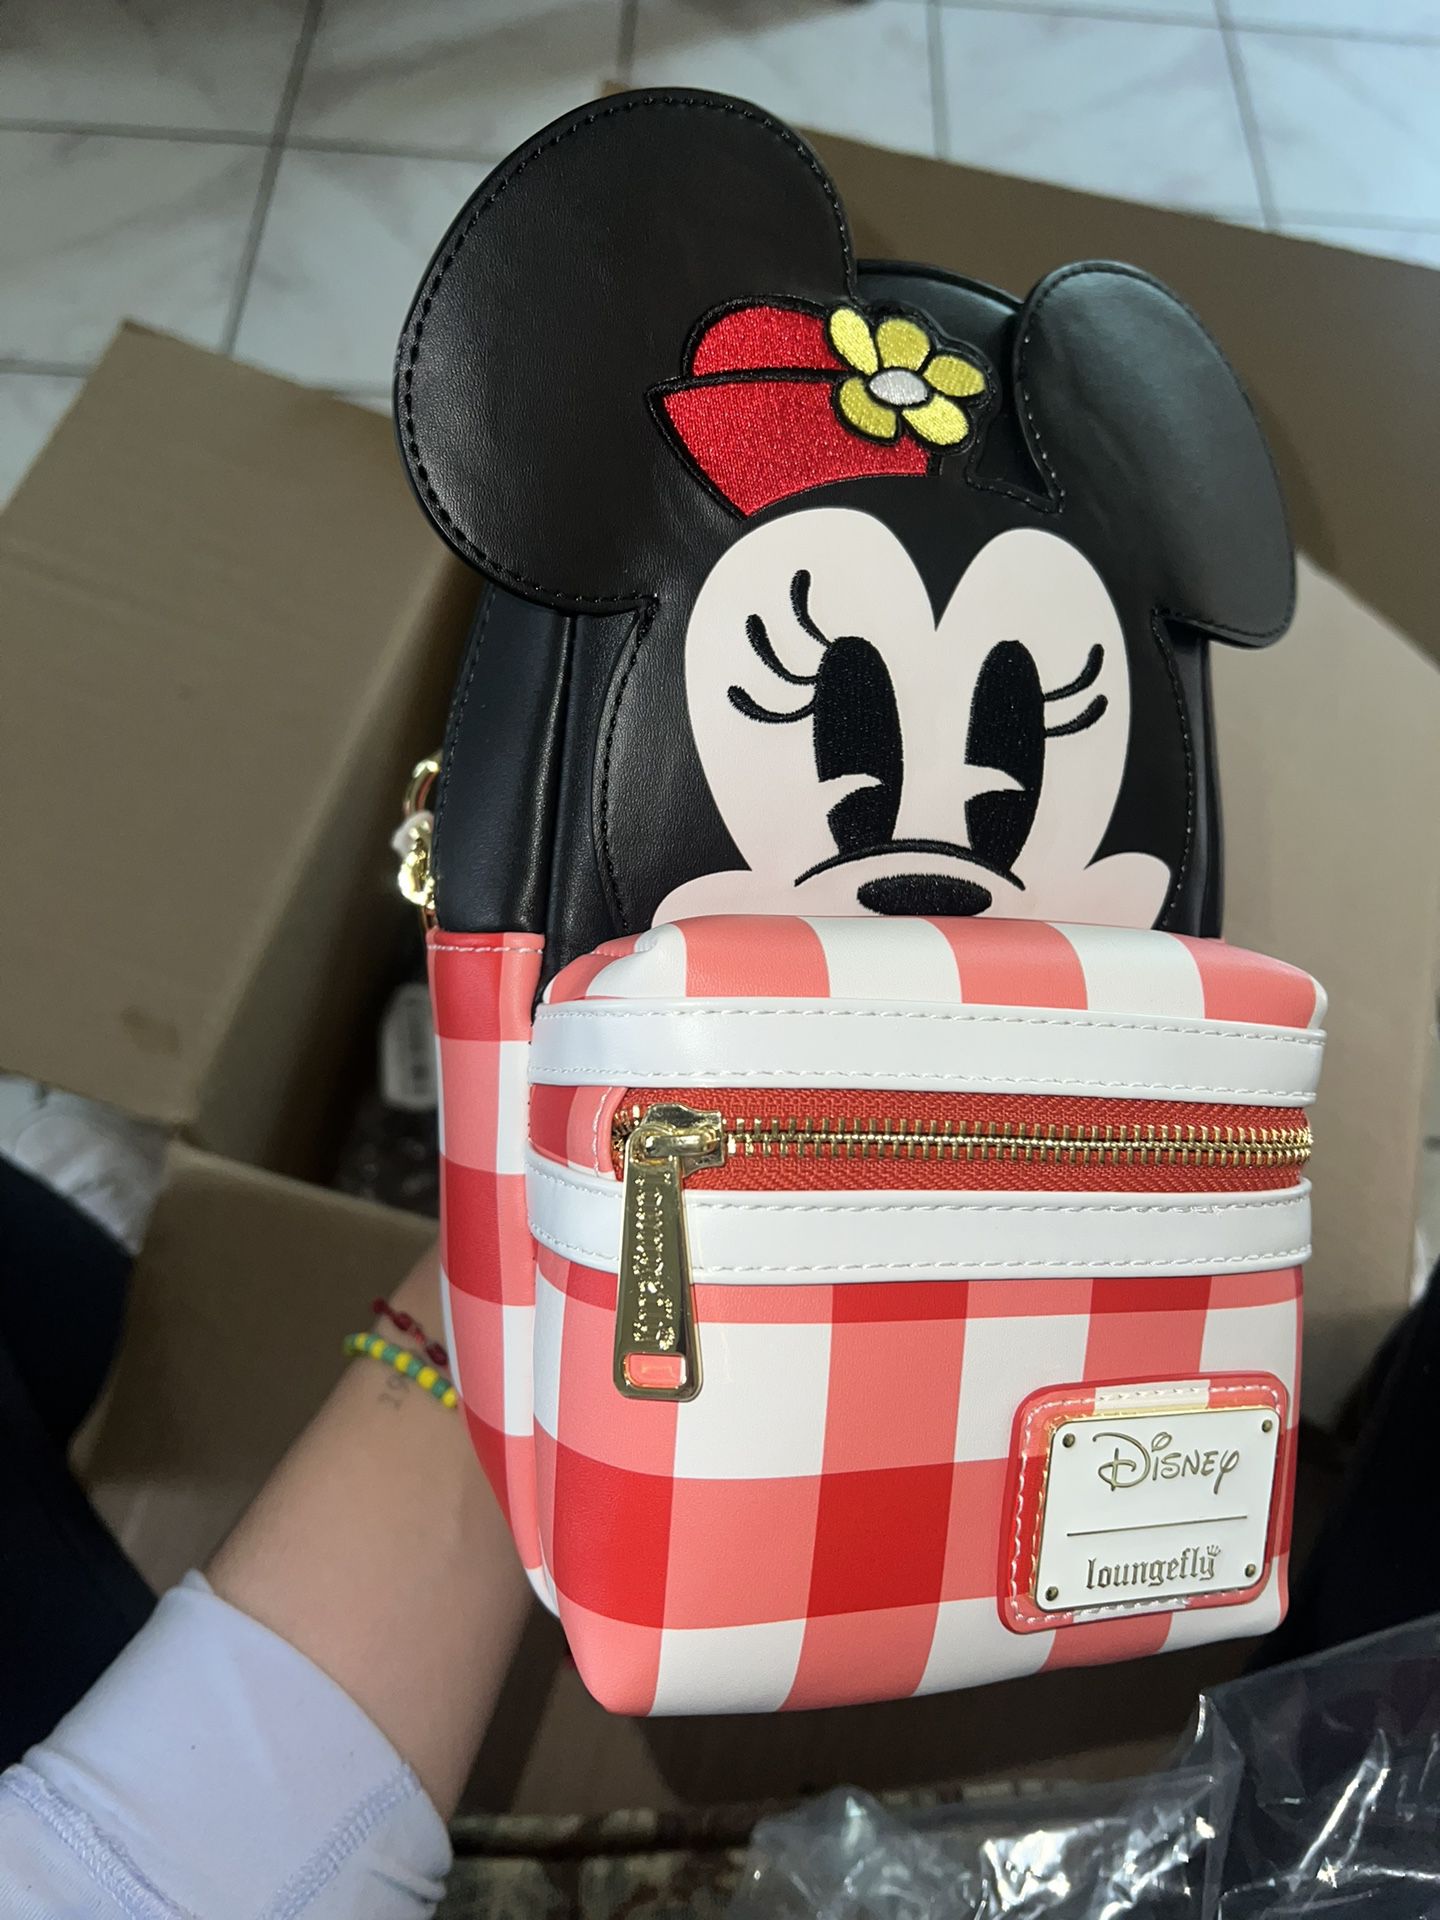 Minnie Mouse Picnic Blanket Cup Holder Crossbody Bag